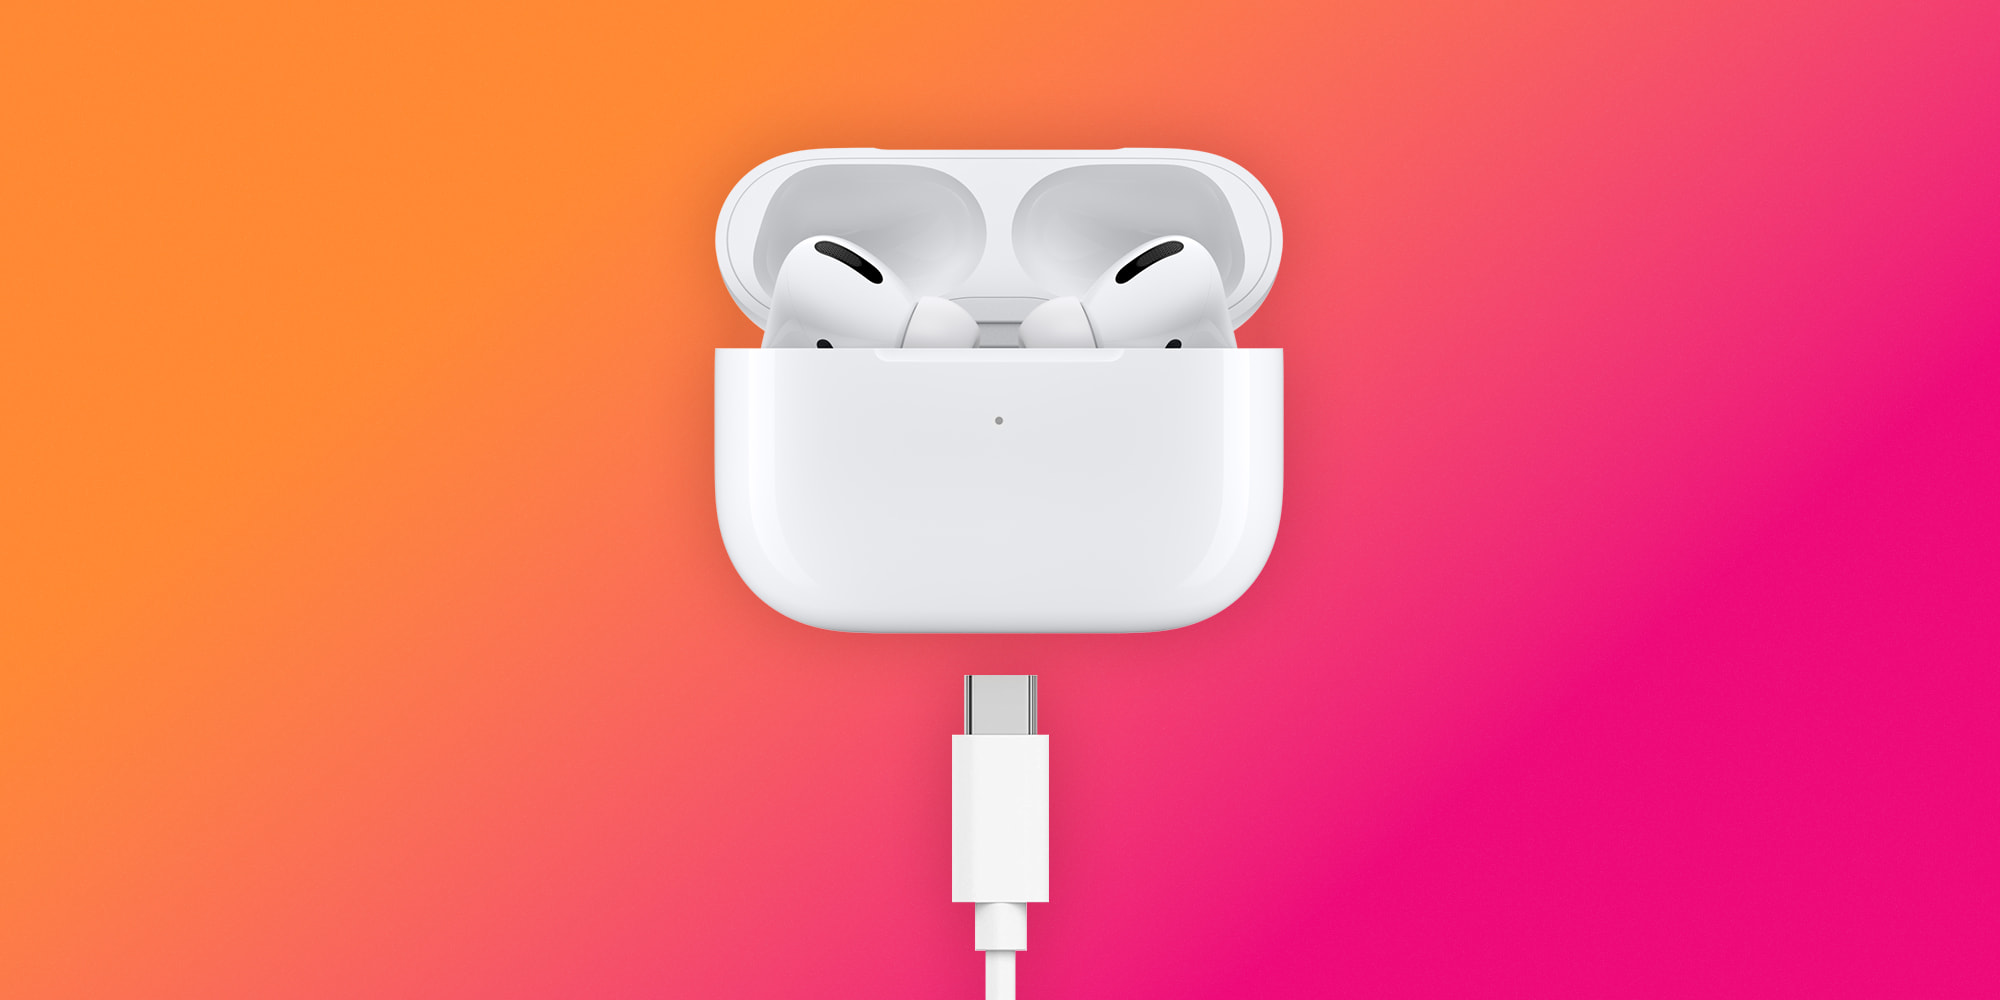 AirPods Pro with USB-C charging coming soon, Kuo says - 9to5Mac